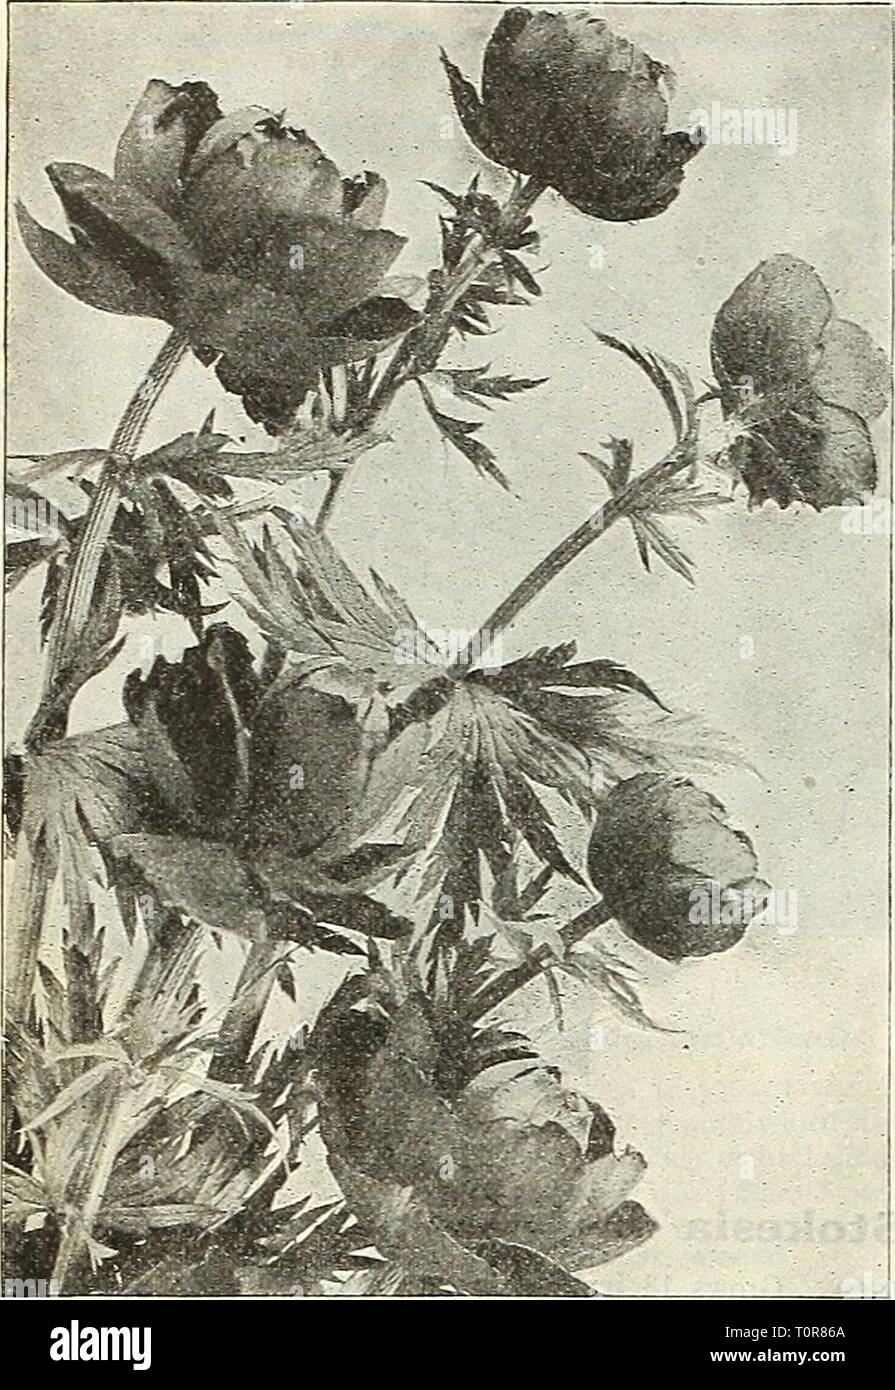 Dreer's autumn catalogue 1928 (1928) Dreer's autumn catalogue 1928  dreersautumncata1928henr Year: 1928  46 /flEwyAJim'^ HARDY PERENMIALPIANTS MMiPmii    Trollius or Globe Flower Tradescantia (Spider wort) Virginica. Produces a succession of blue flowers all summer; 2 feet. — Alba. A white-flowered form. 25 cts. each; S2.50 per doz. Trollius (Globe Flower) Europaeus Superbus. Desirable free-flowering plants, pro- ducing their giant bright yellow, Buttercup like blossoms on stems 1 to 2 feet high from May until August; succeed admirably in the border in a half shady position in well drained pre Stock Photo